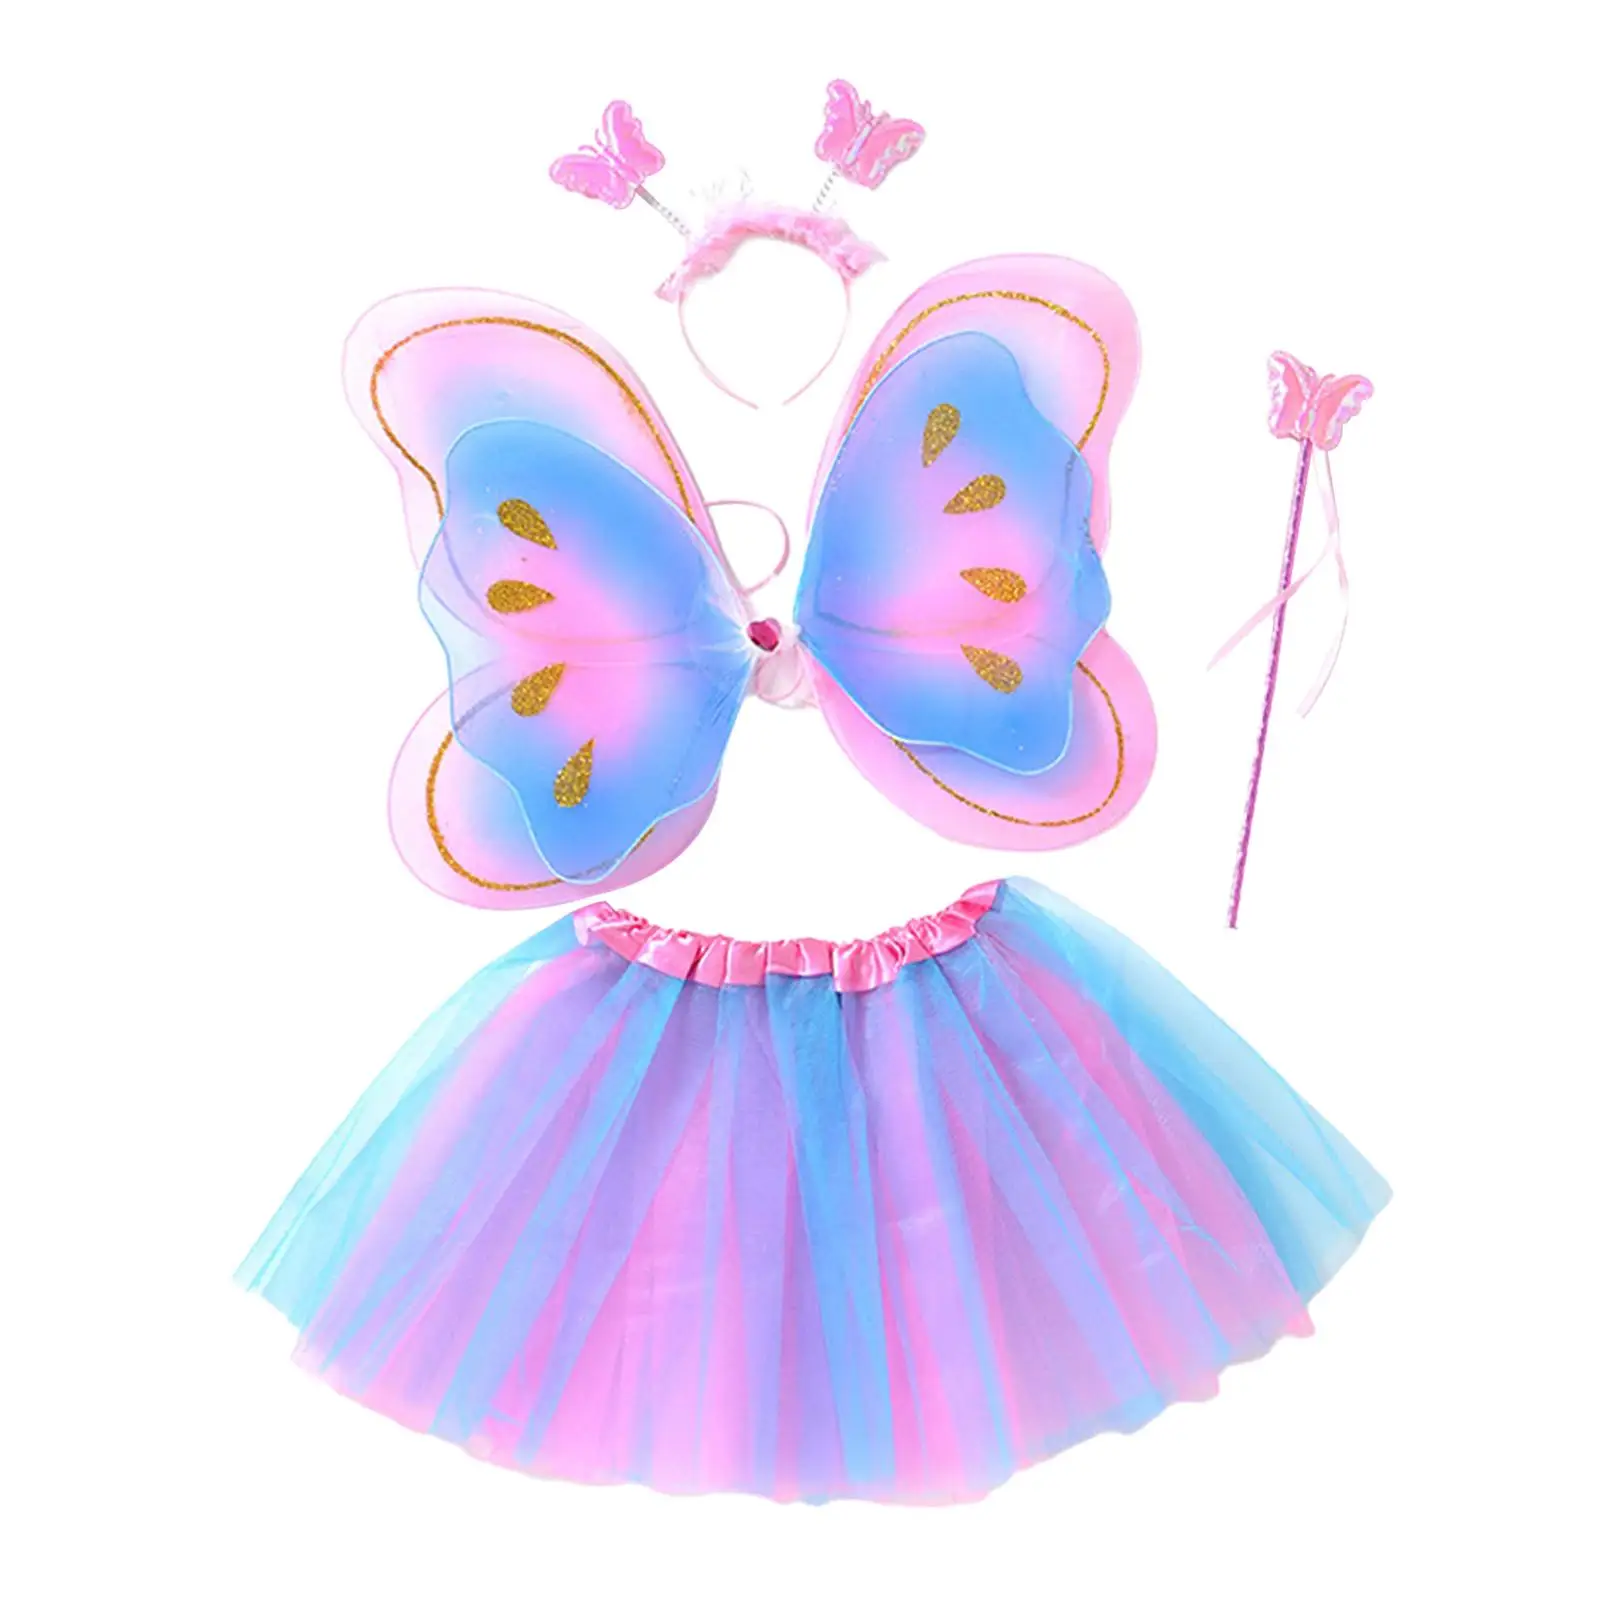 Fancy Girls Fairy Butterfly Costume Set Princess Clothing for Halloween Big Event Birthday Party Holiday Princess Cosplay